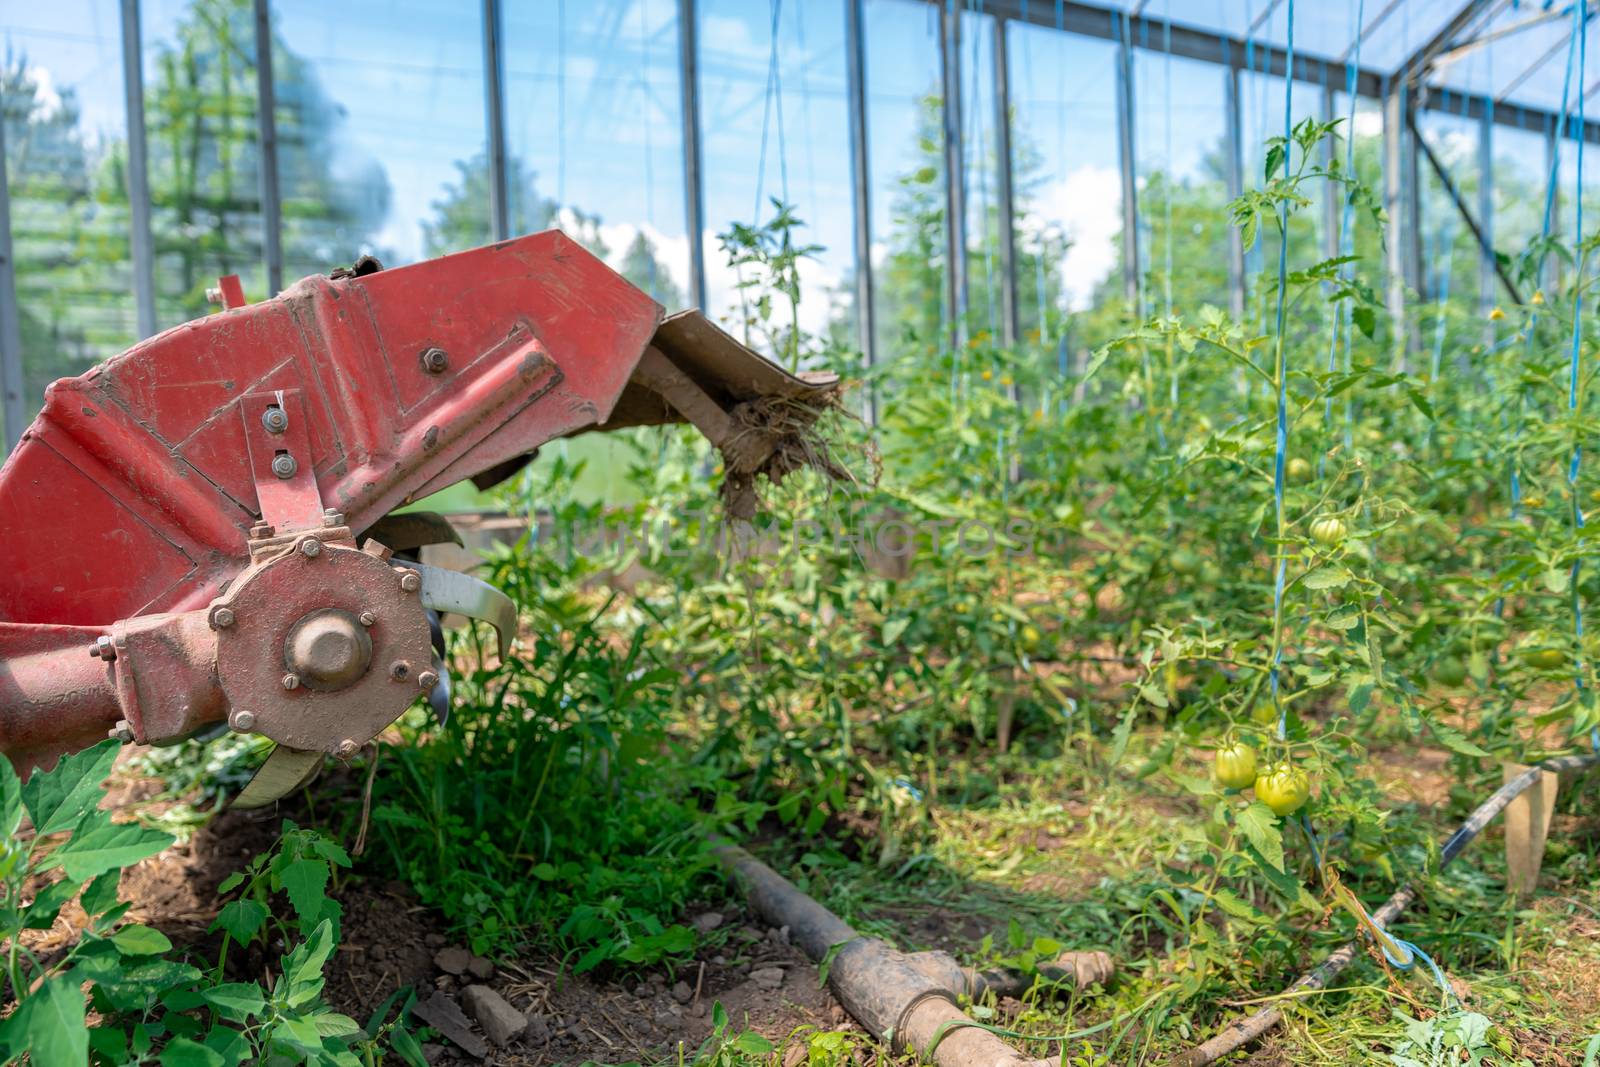 small old tractor in a greenhouse on a farm to help with the cultivation of fruits and vegetables by Edophoto